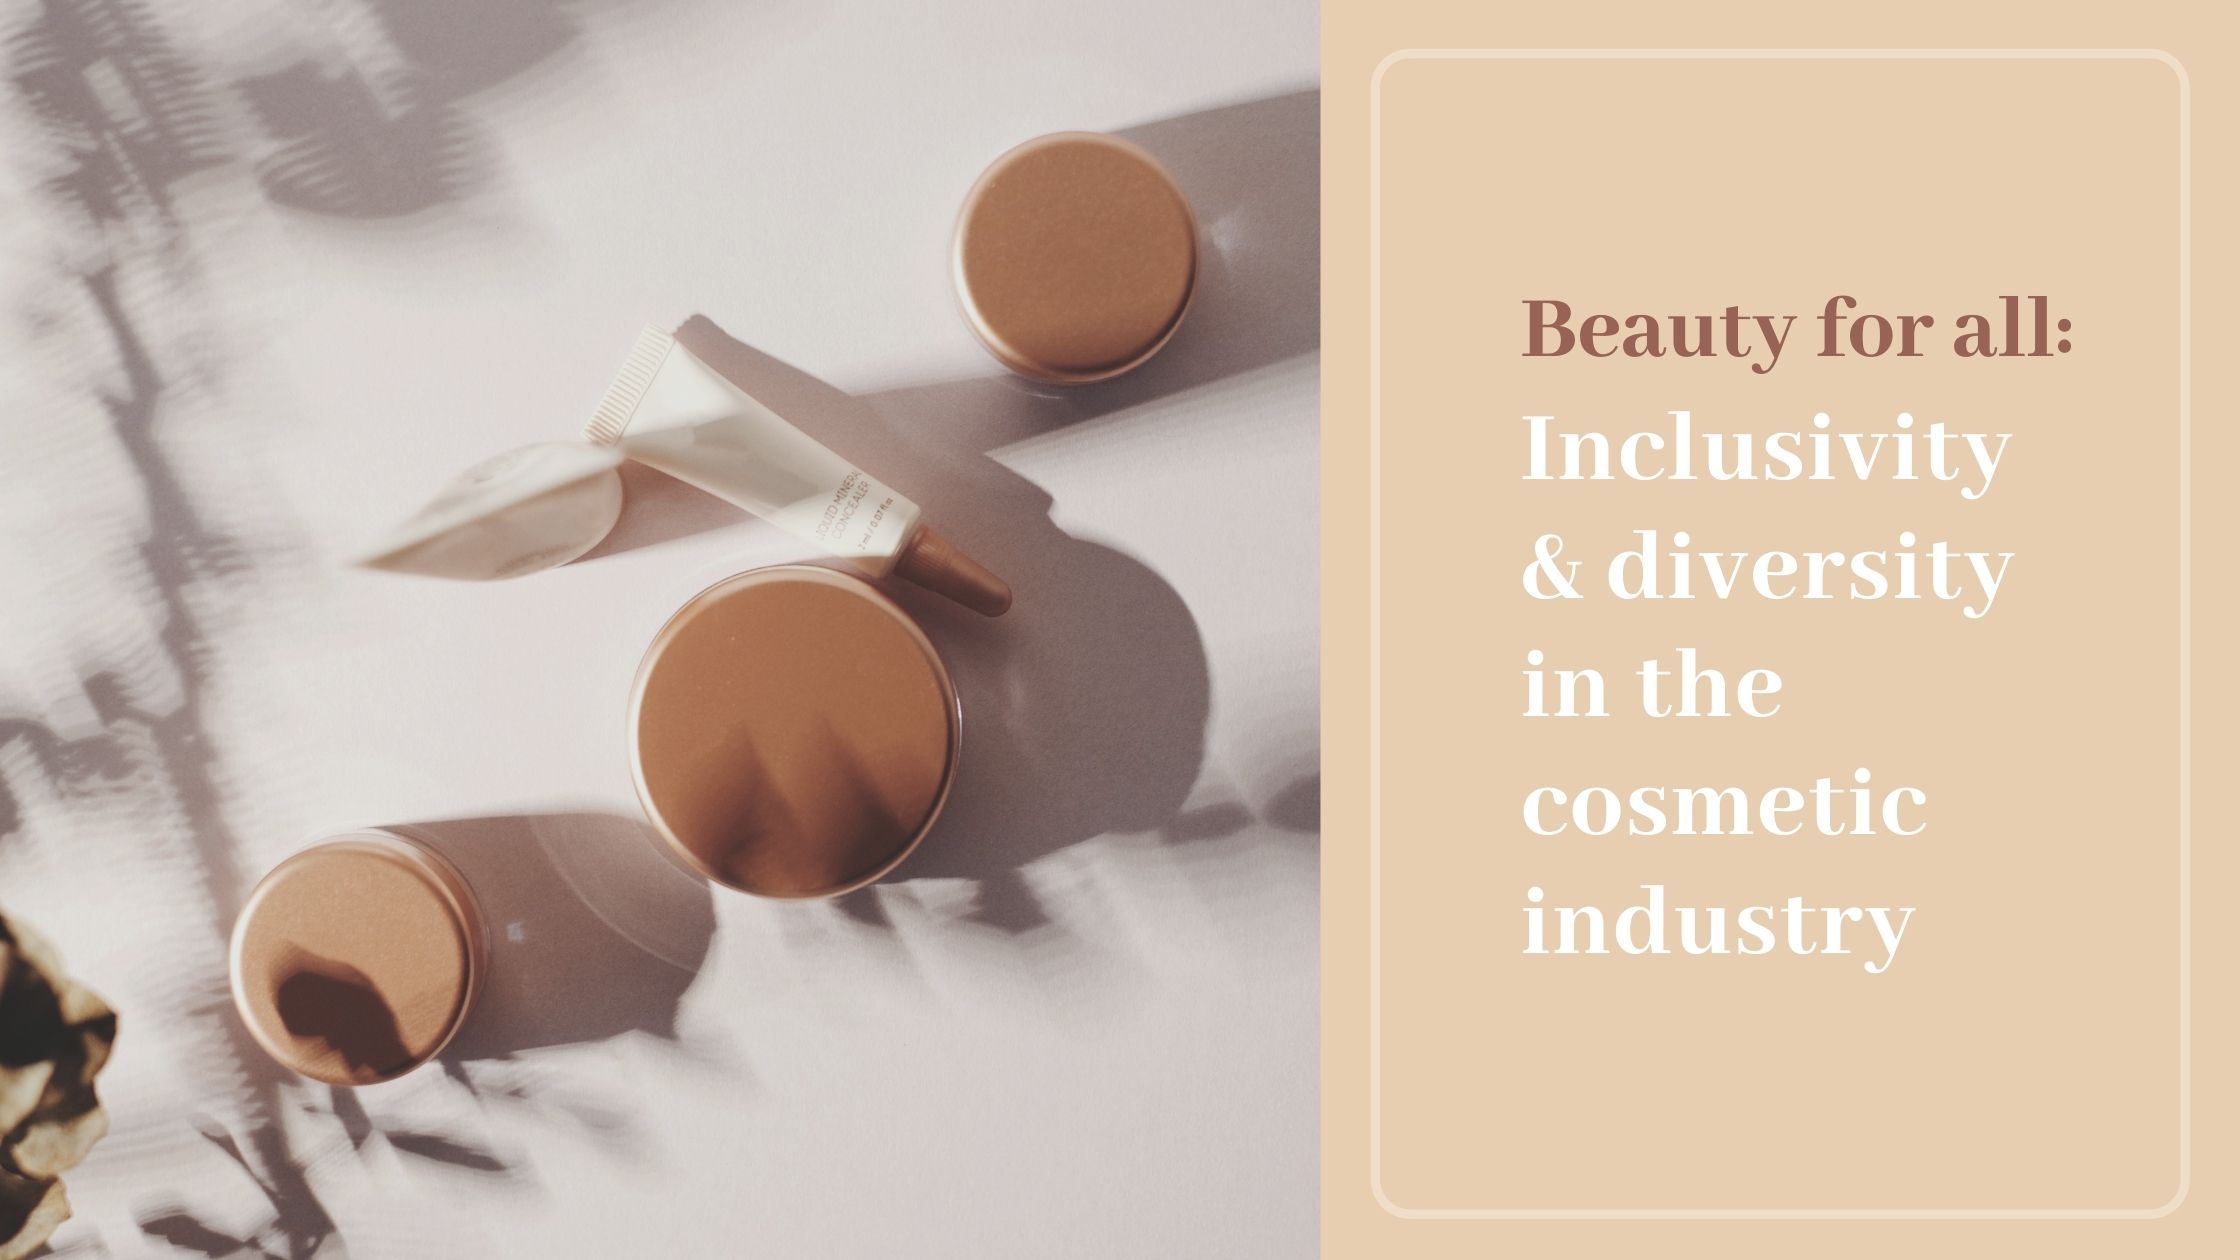 Inclusive makeup products